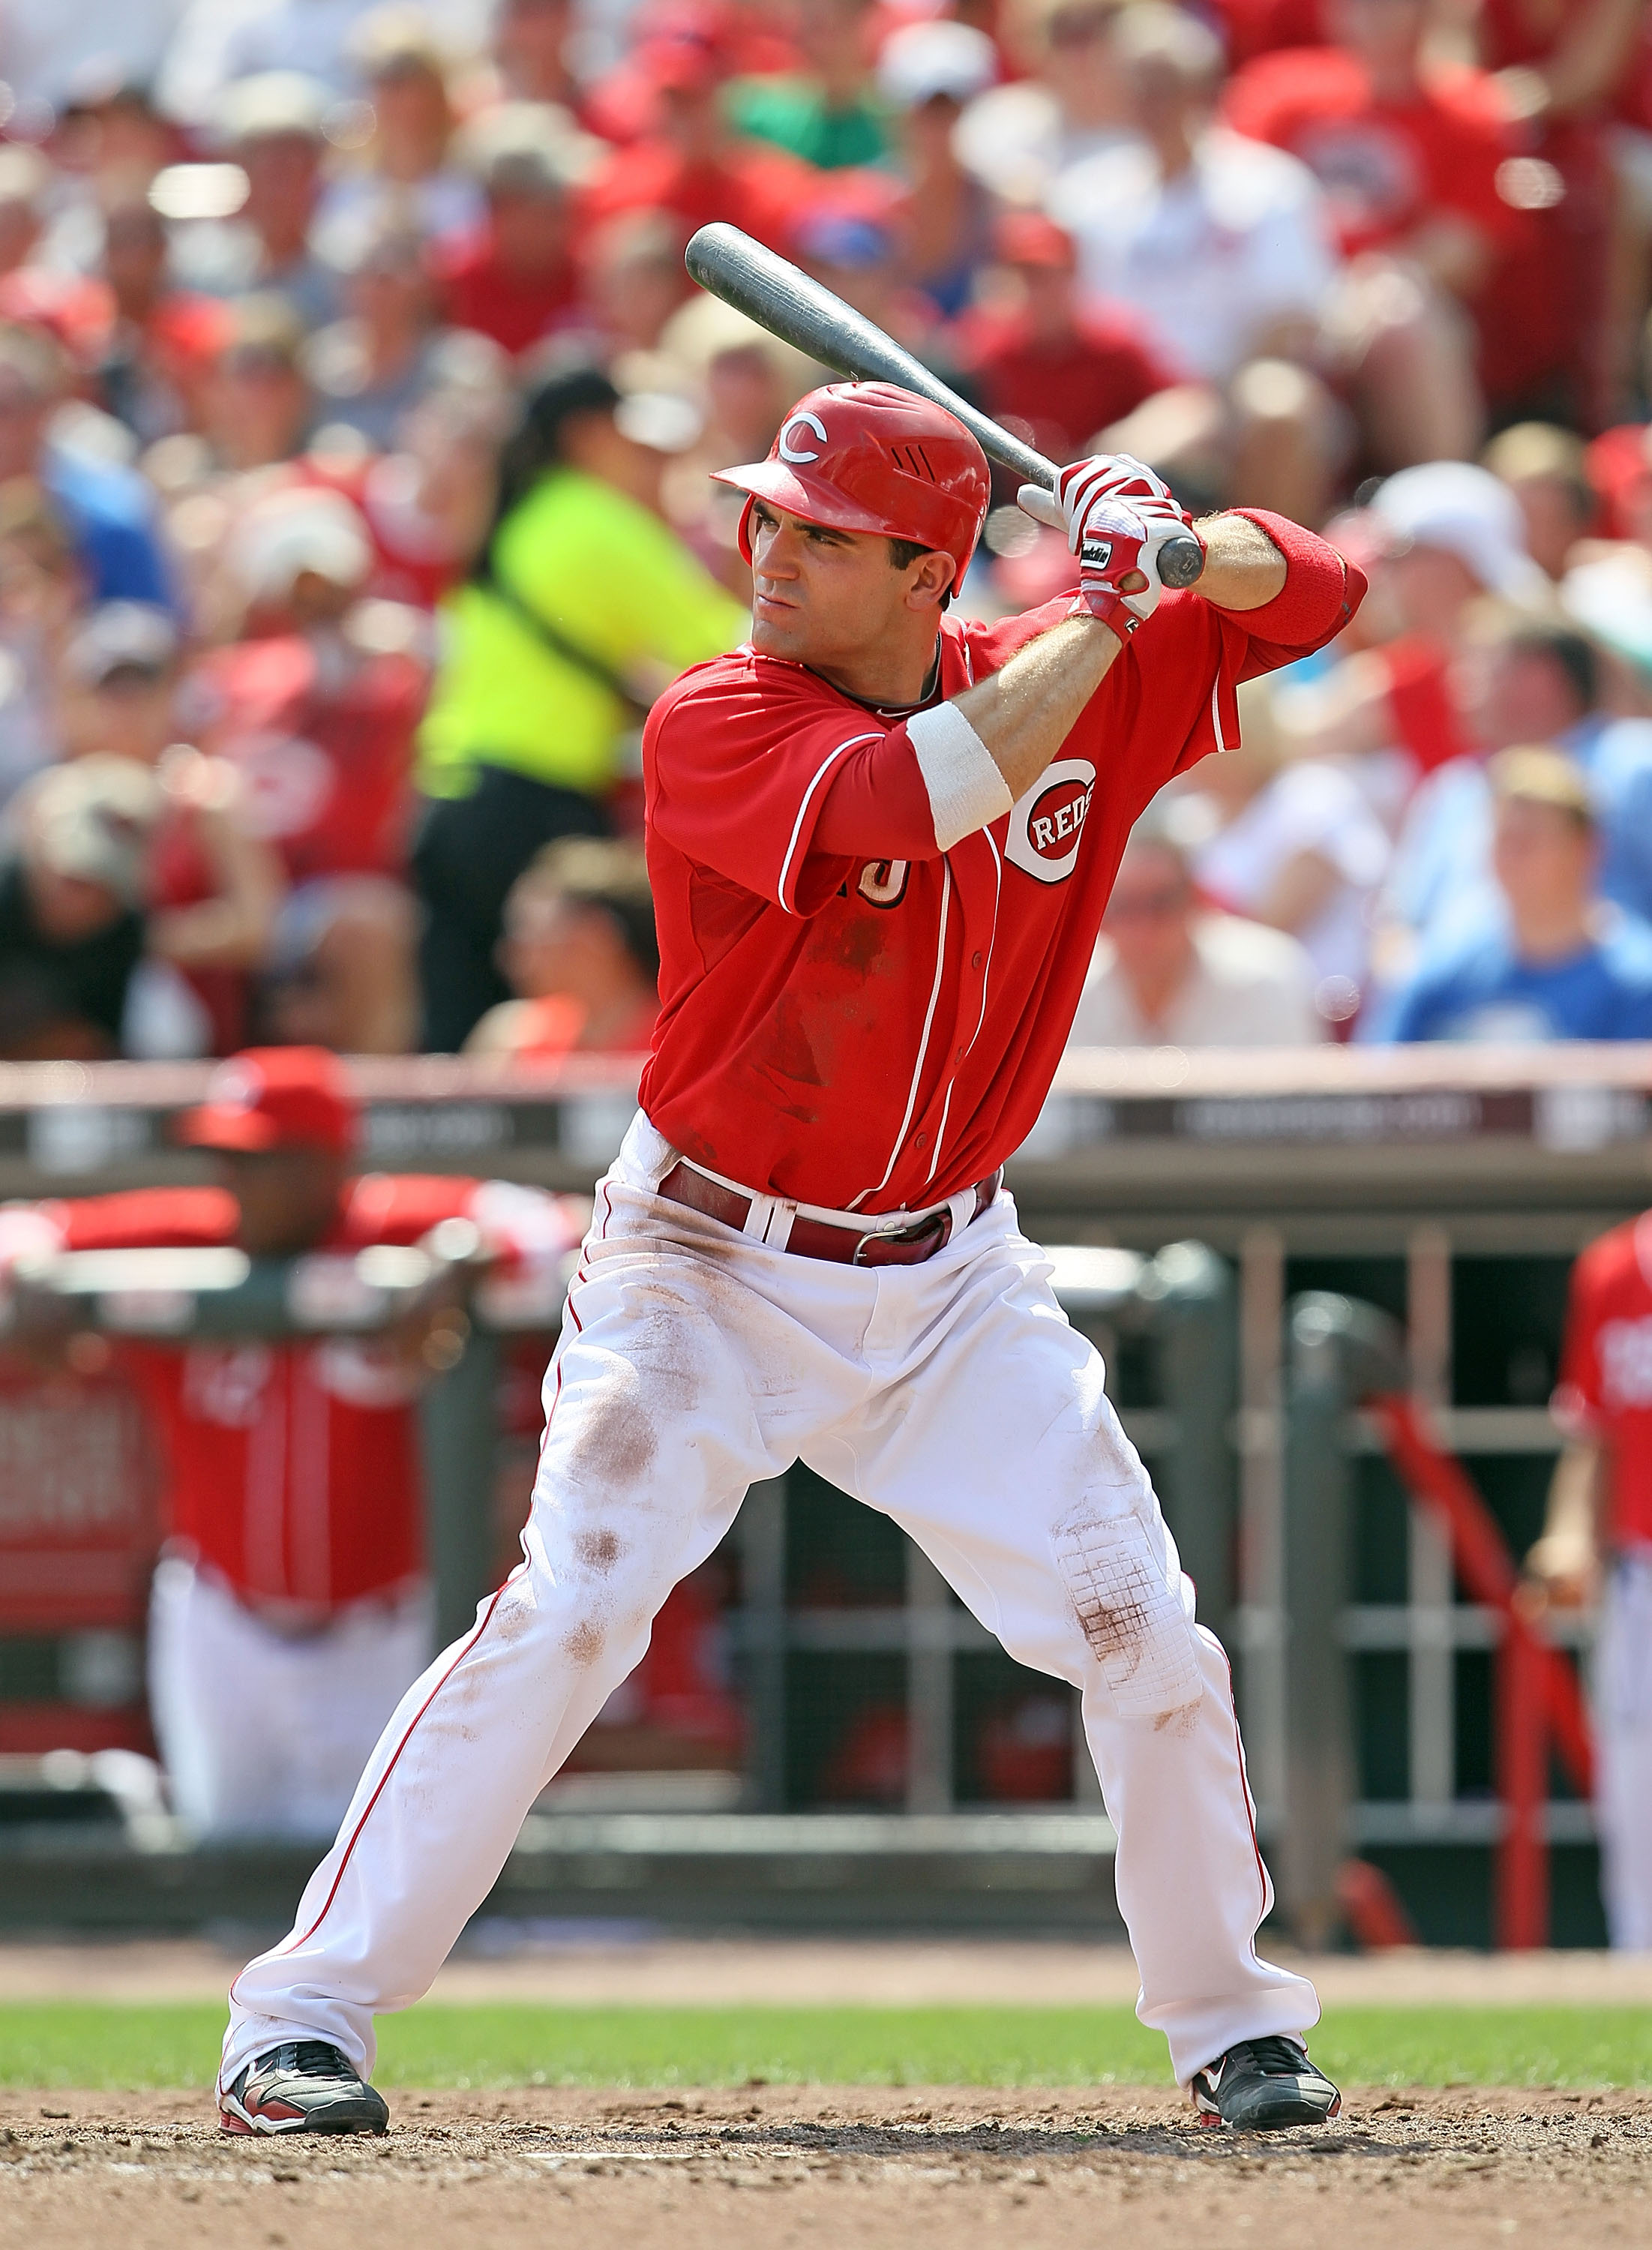 CINCINNATI - AUGUST 29:  Joey Votto #19 of the Cincinnati Reds is at bat during the game against the Chicago Cubs at Great American Ball Park on August 29, 2010 in Cincinnati, Ohio.  (Photo by Andy Lyons/Getty Images)